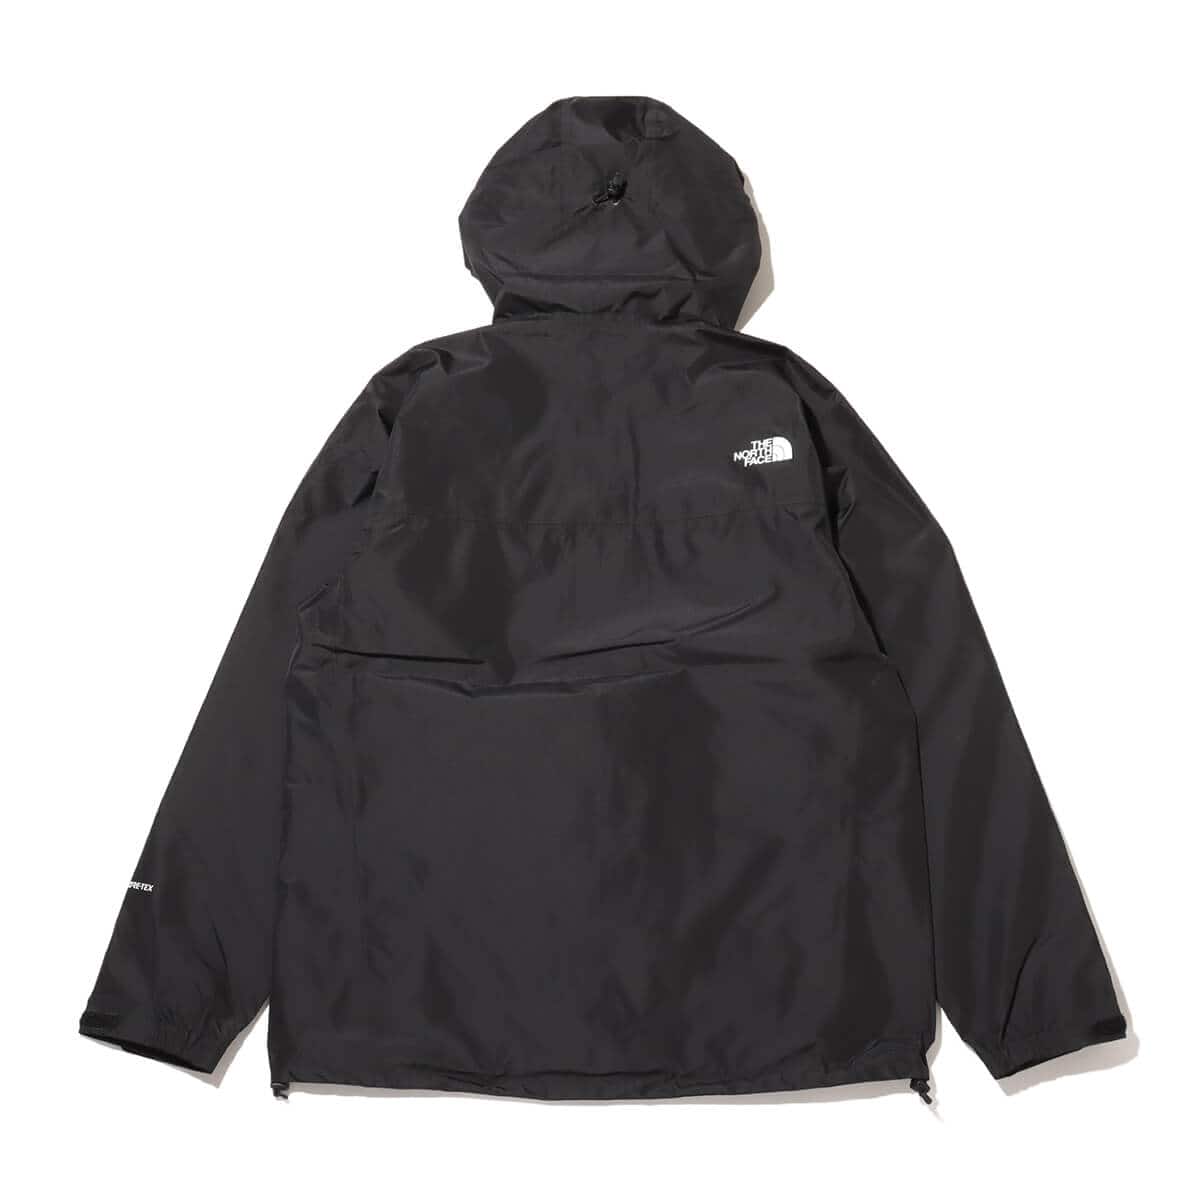 THE NORTH FACE Cloud Jacket ブラック 24SS-I